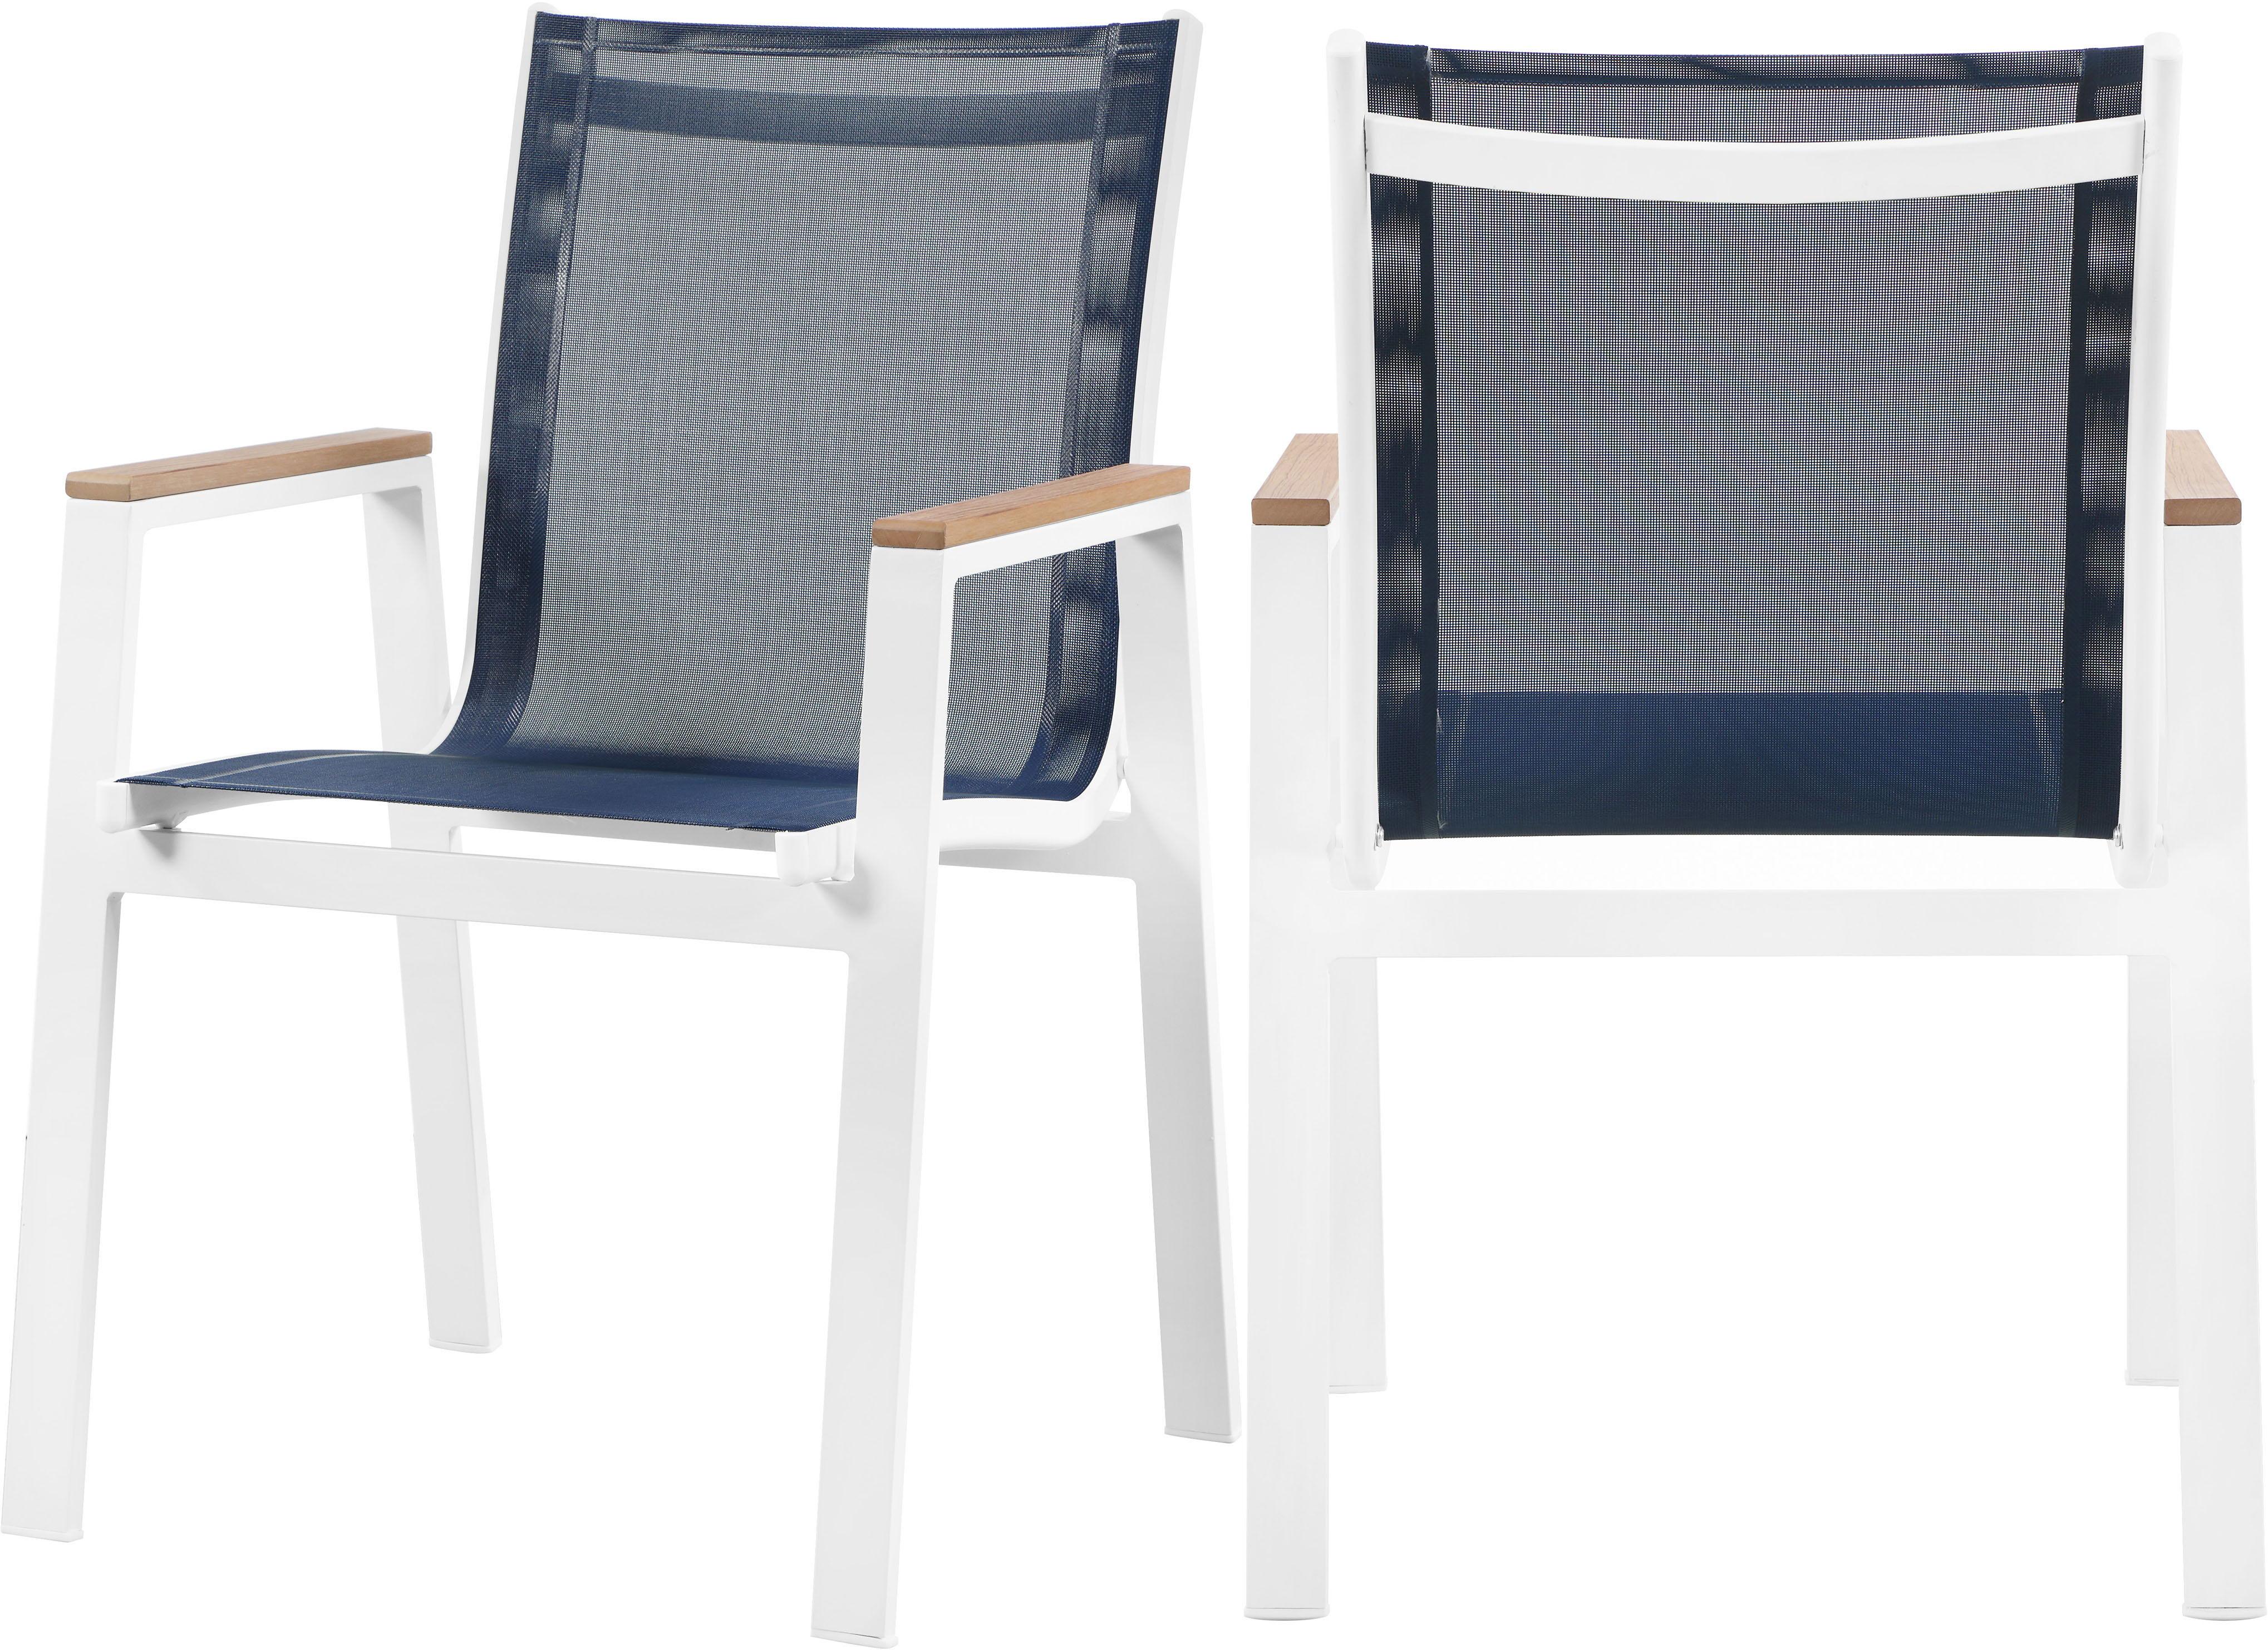 Meridian Furniture - Nizuc - Outdoor Patio Dining Arm Chair (Set of 2) - Navy - Fabric - 5th Avenue Furniture